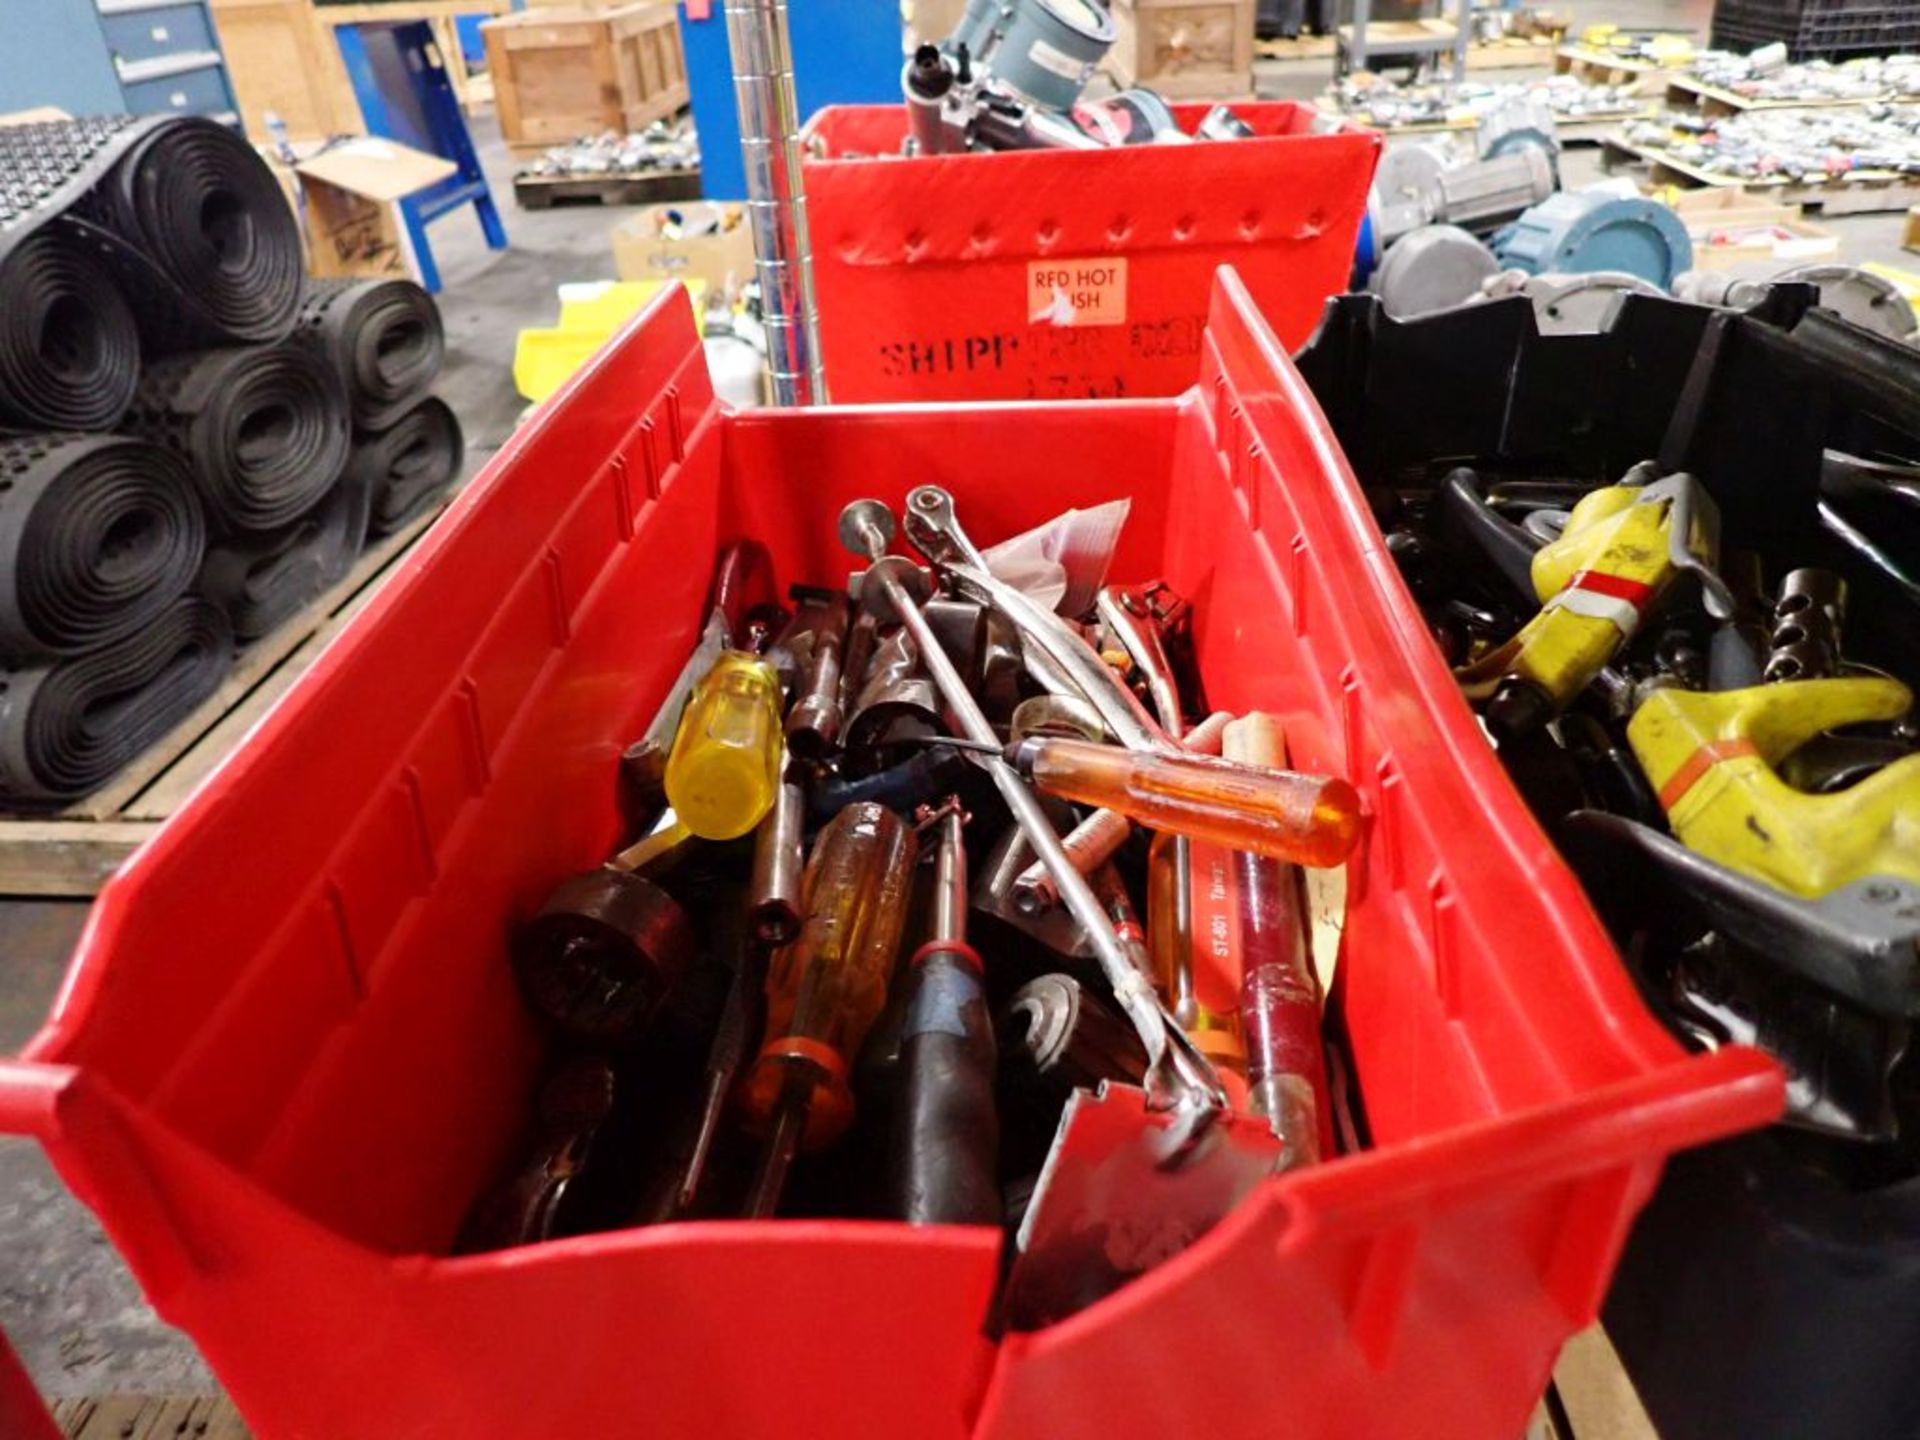 Lot of Assorted Tools | Tag: 241484 | Limited Forklift Assistance Available - $10.00 Lot Loading - Image 7 of 7